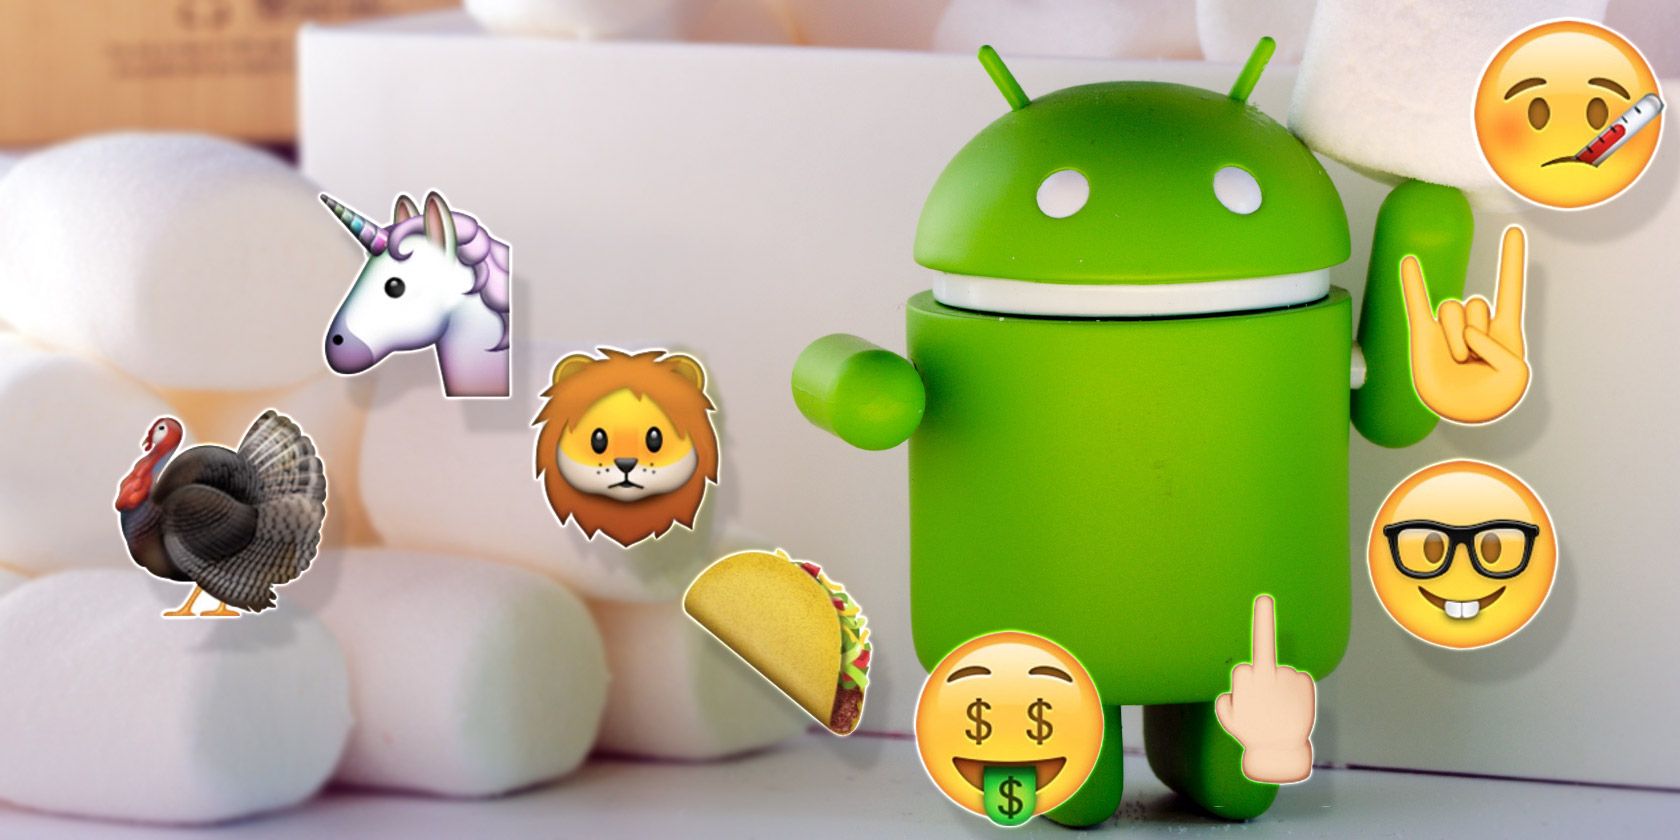 get ios 10.2 emojis on any android